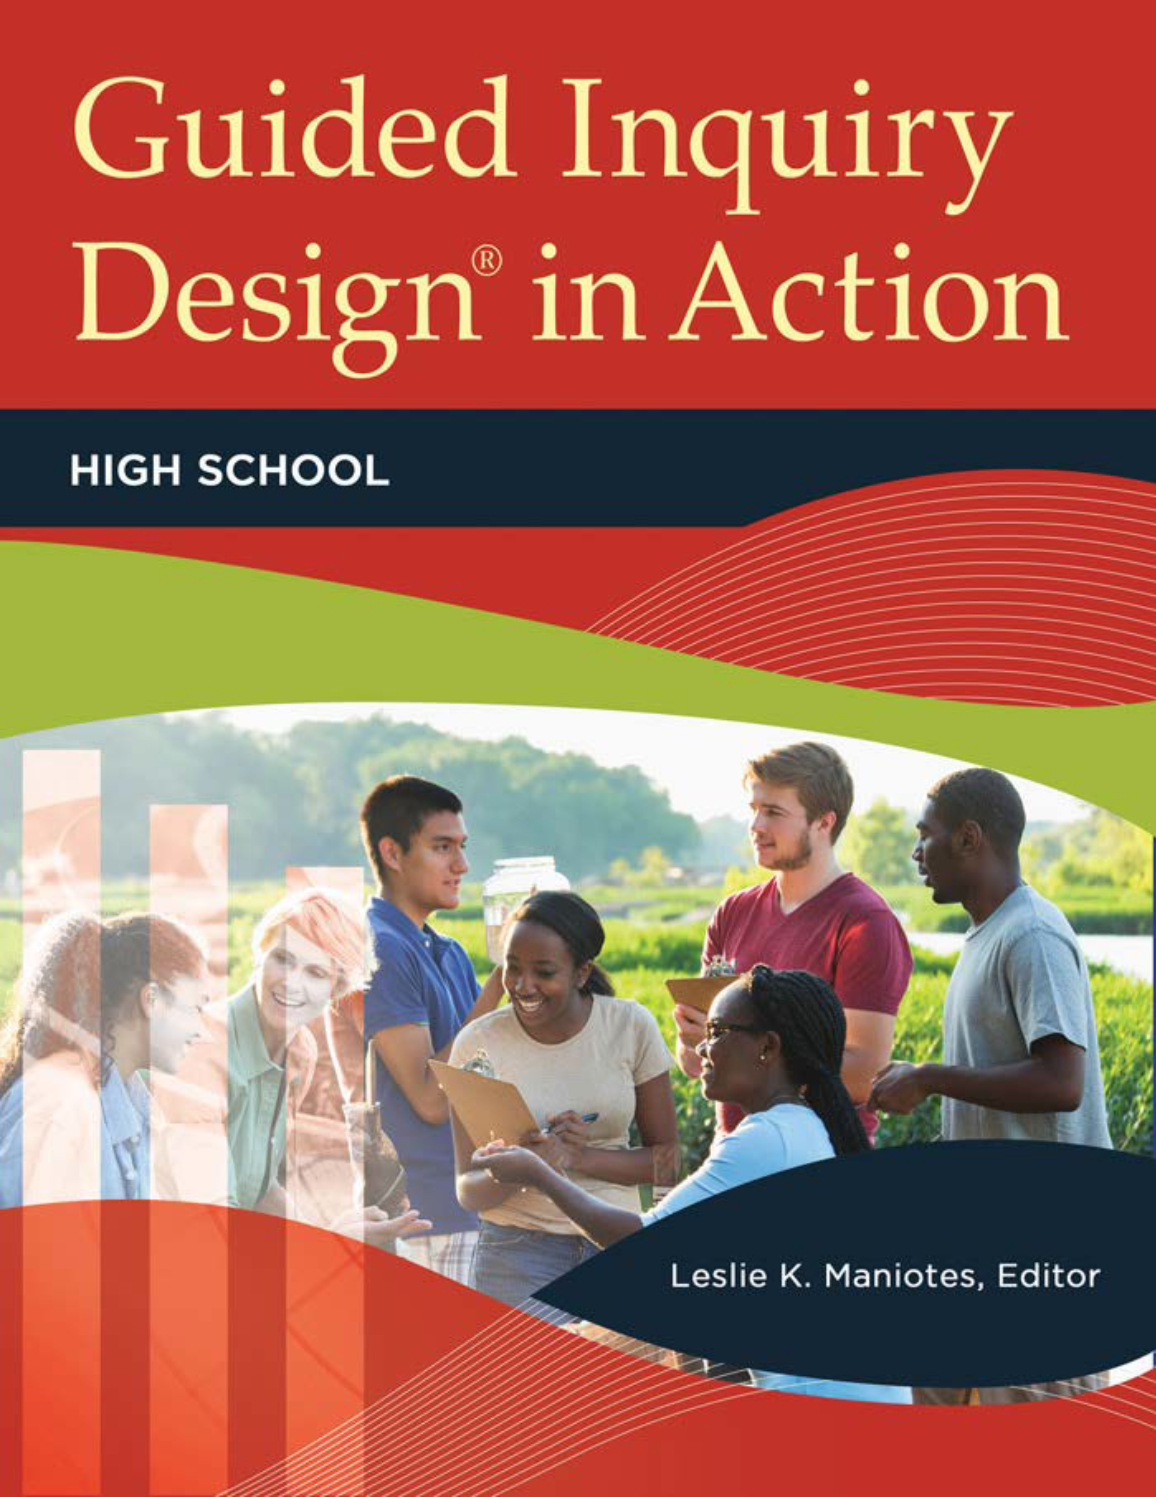 Guided Inquiry Design® in Action: High School page a